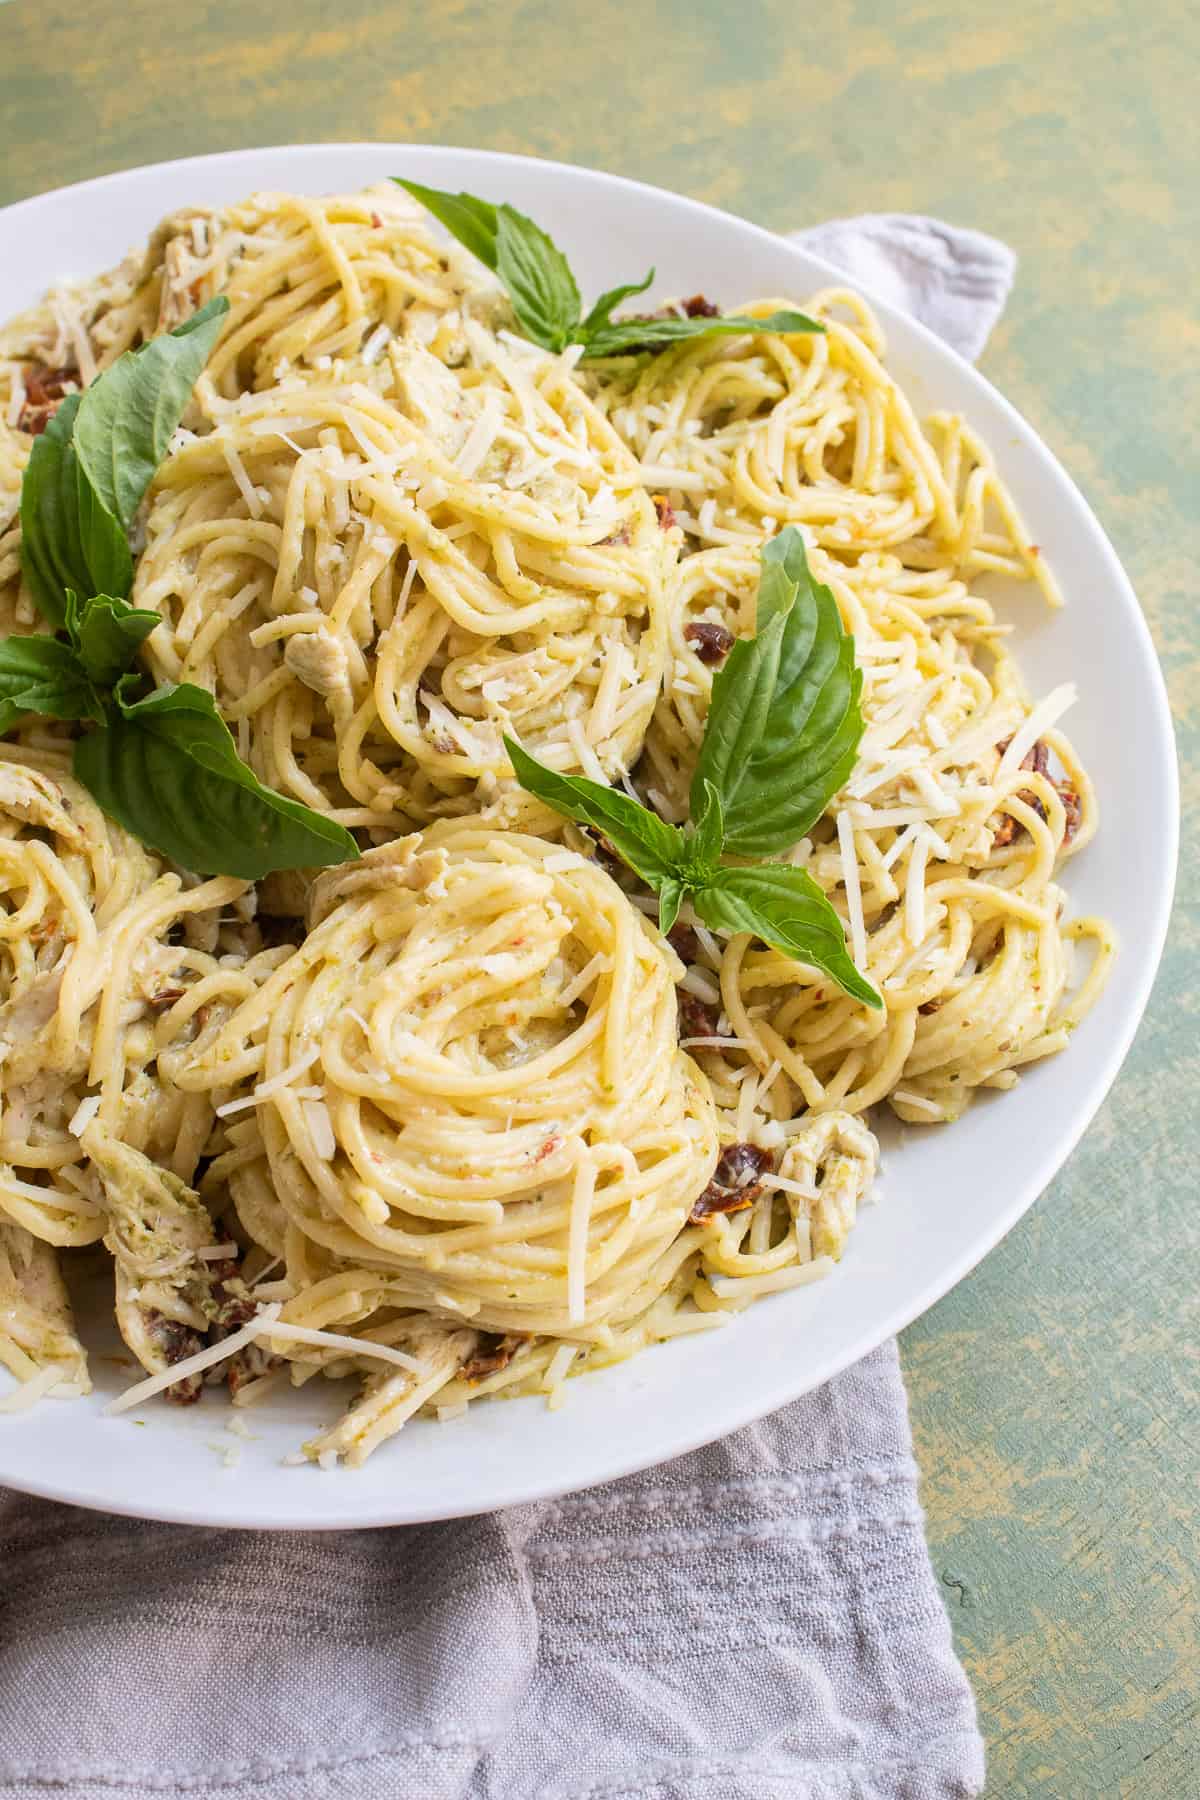 The spaghetti twirled into piles on a white platter and garnished with basil leaves.